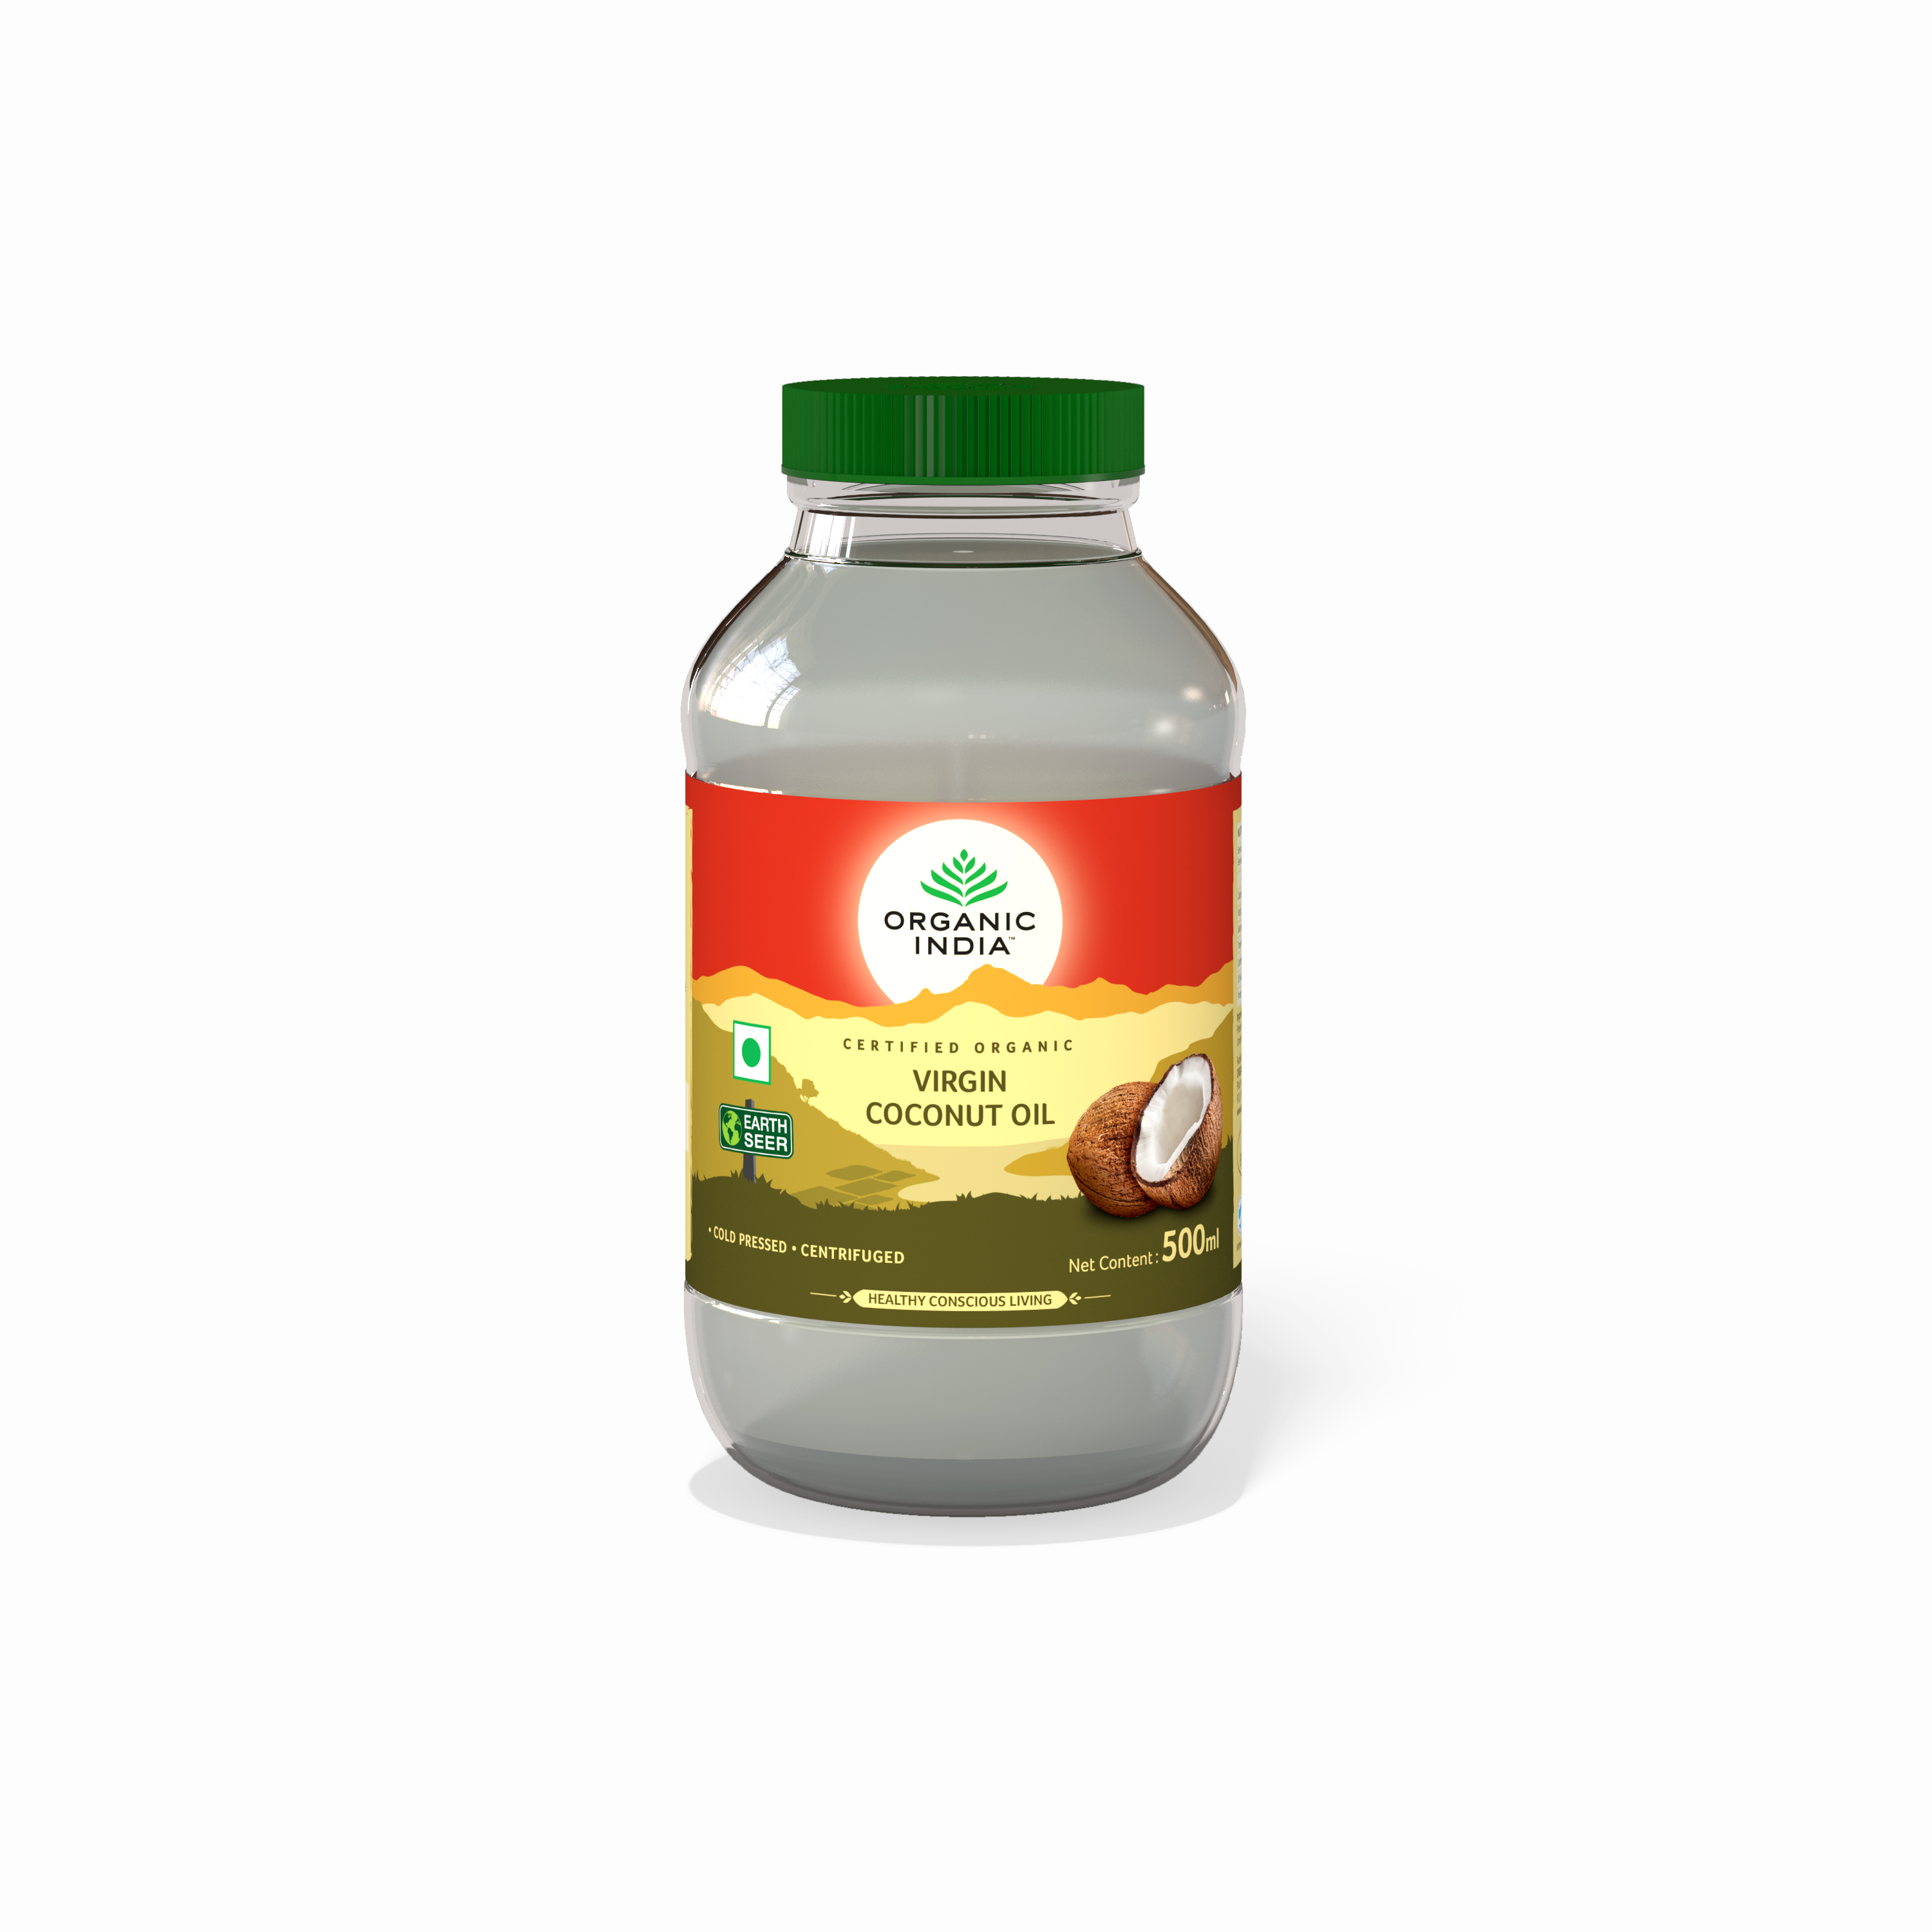 Buy Organic India Coconut Oil Extra Virgin at Best Price Online